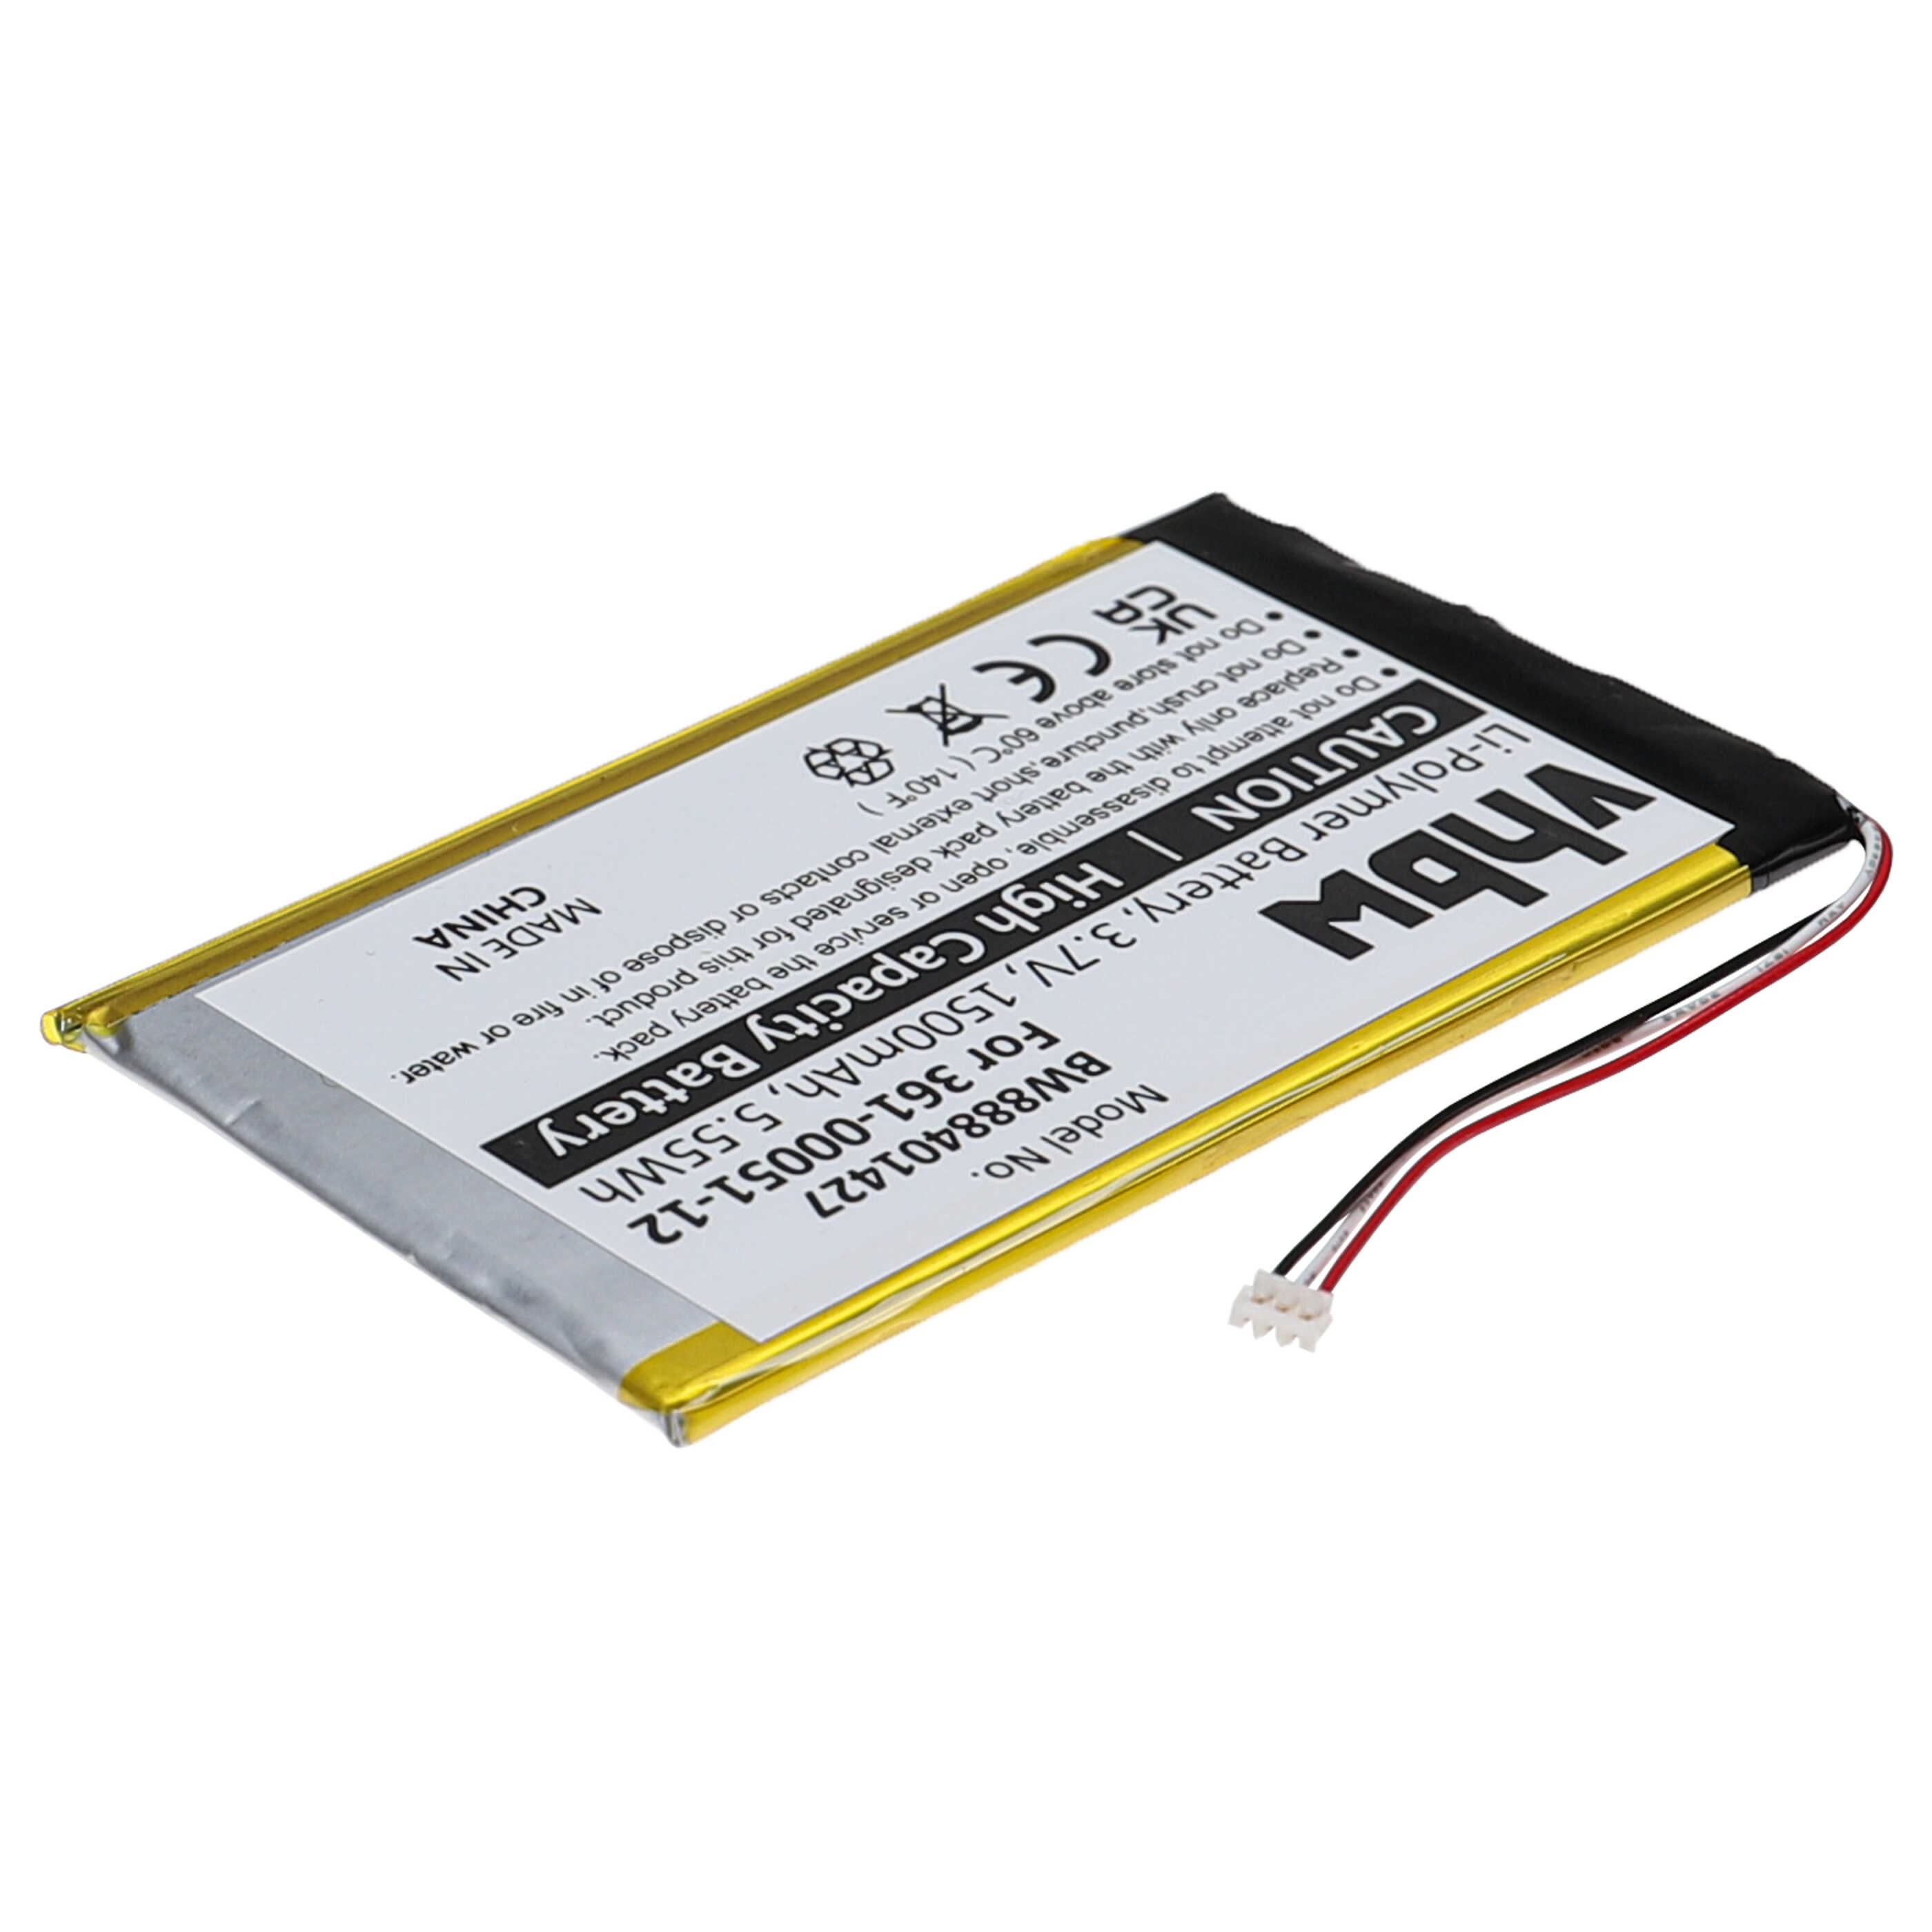 GPS Battery Replacement for Garmin EE39EF08B0E3, US503, 361-00051-02, 361-00051-12 - 1500mAh, 3.7V